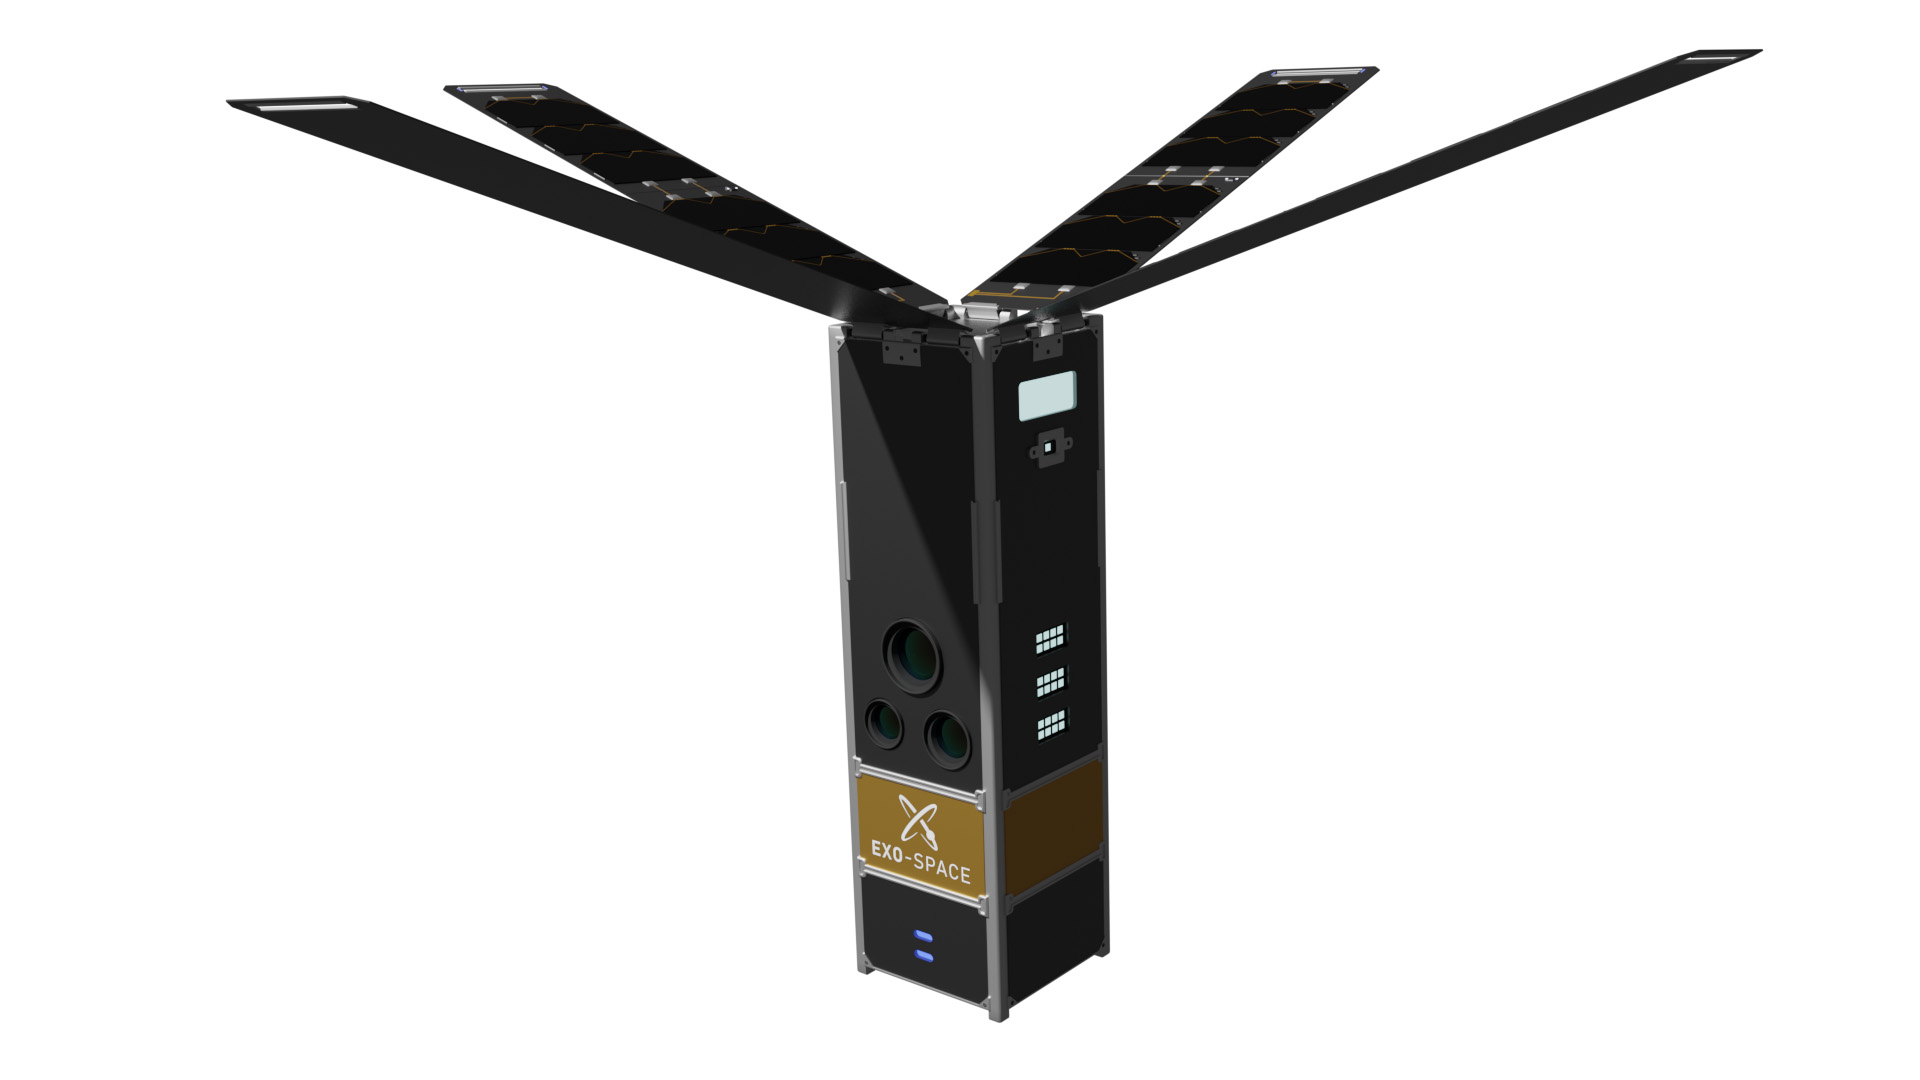 Exo-Space Vision-1 image processor integrated into 3U CubeSat